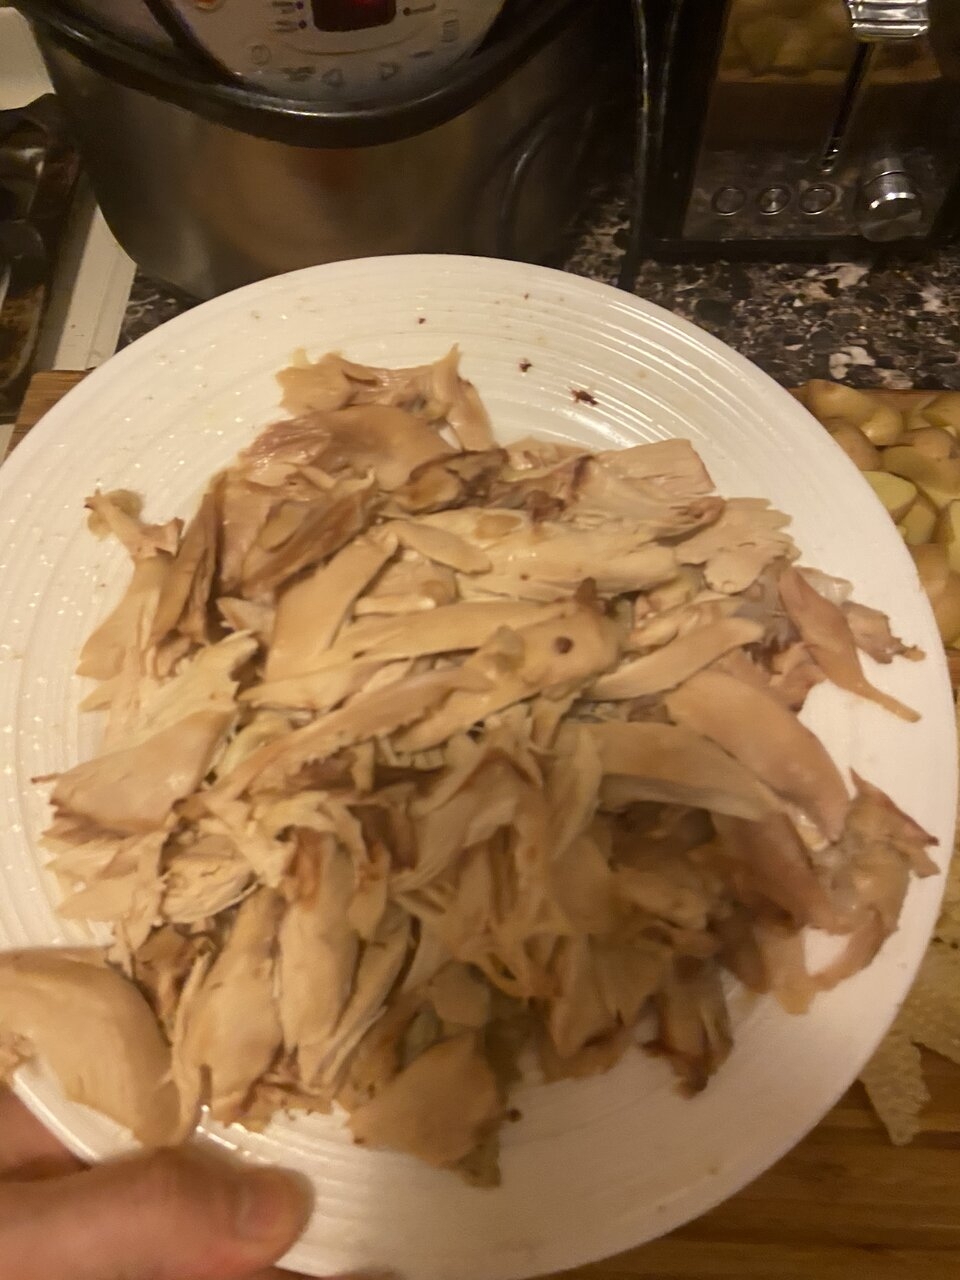 cleaned chicken meat